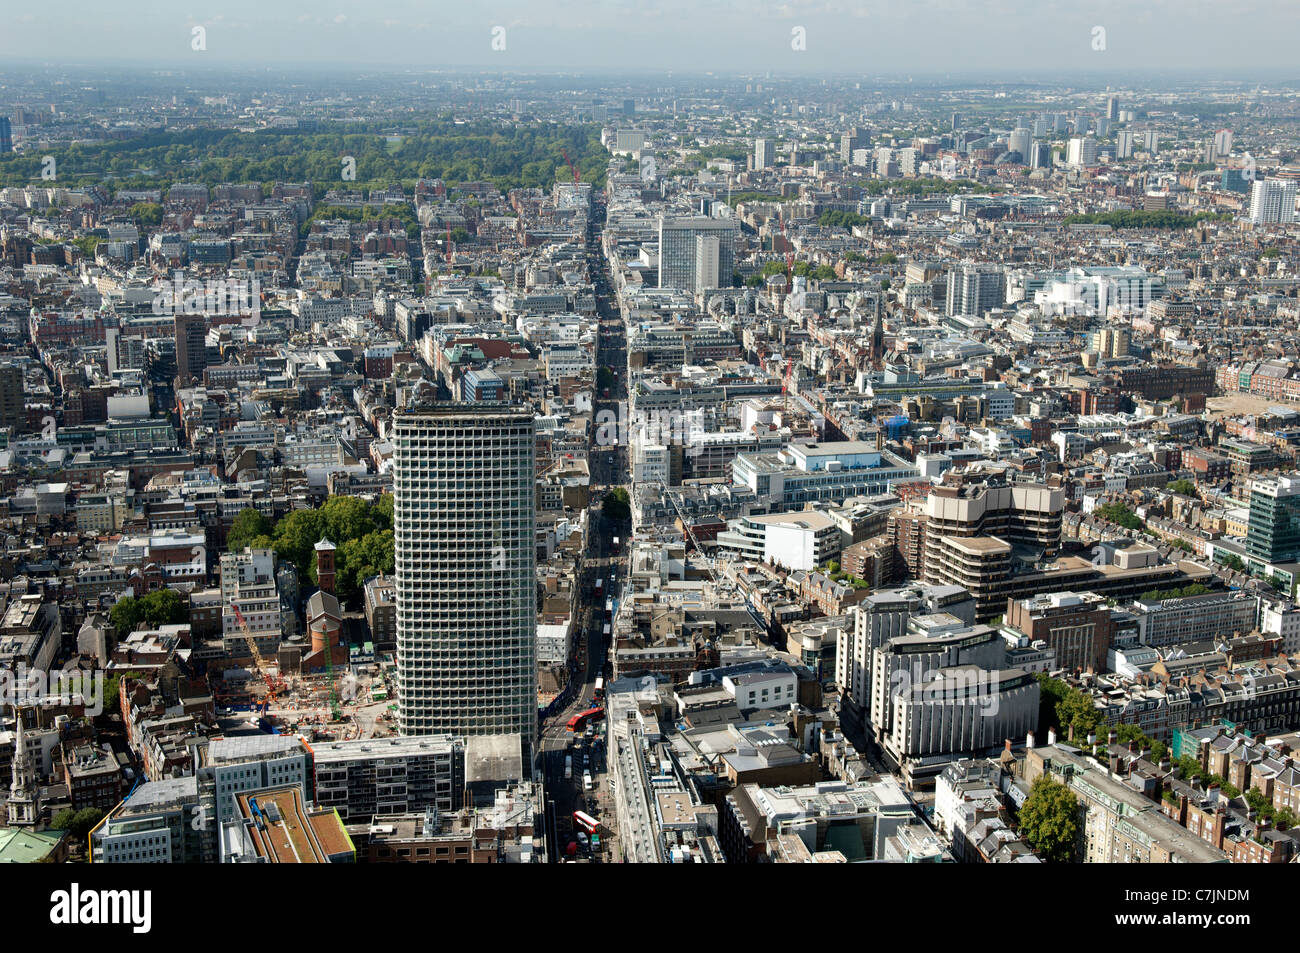 London's West End and Oxford Street from the air. Stock Photo